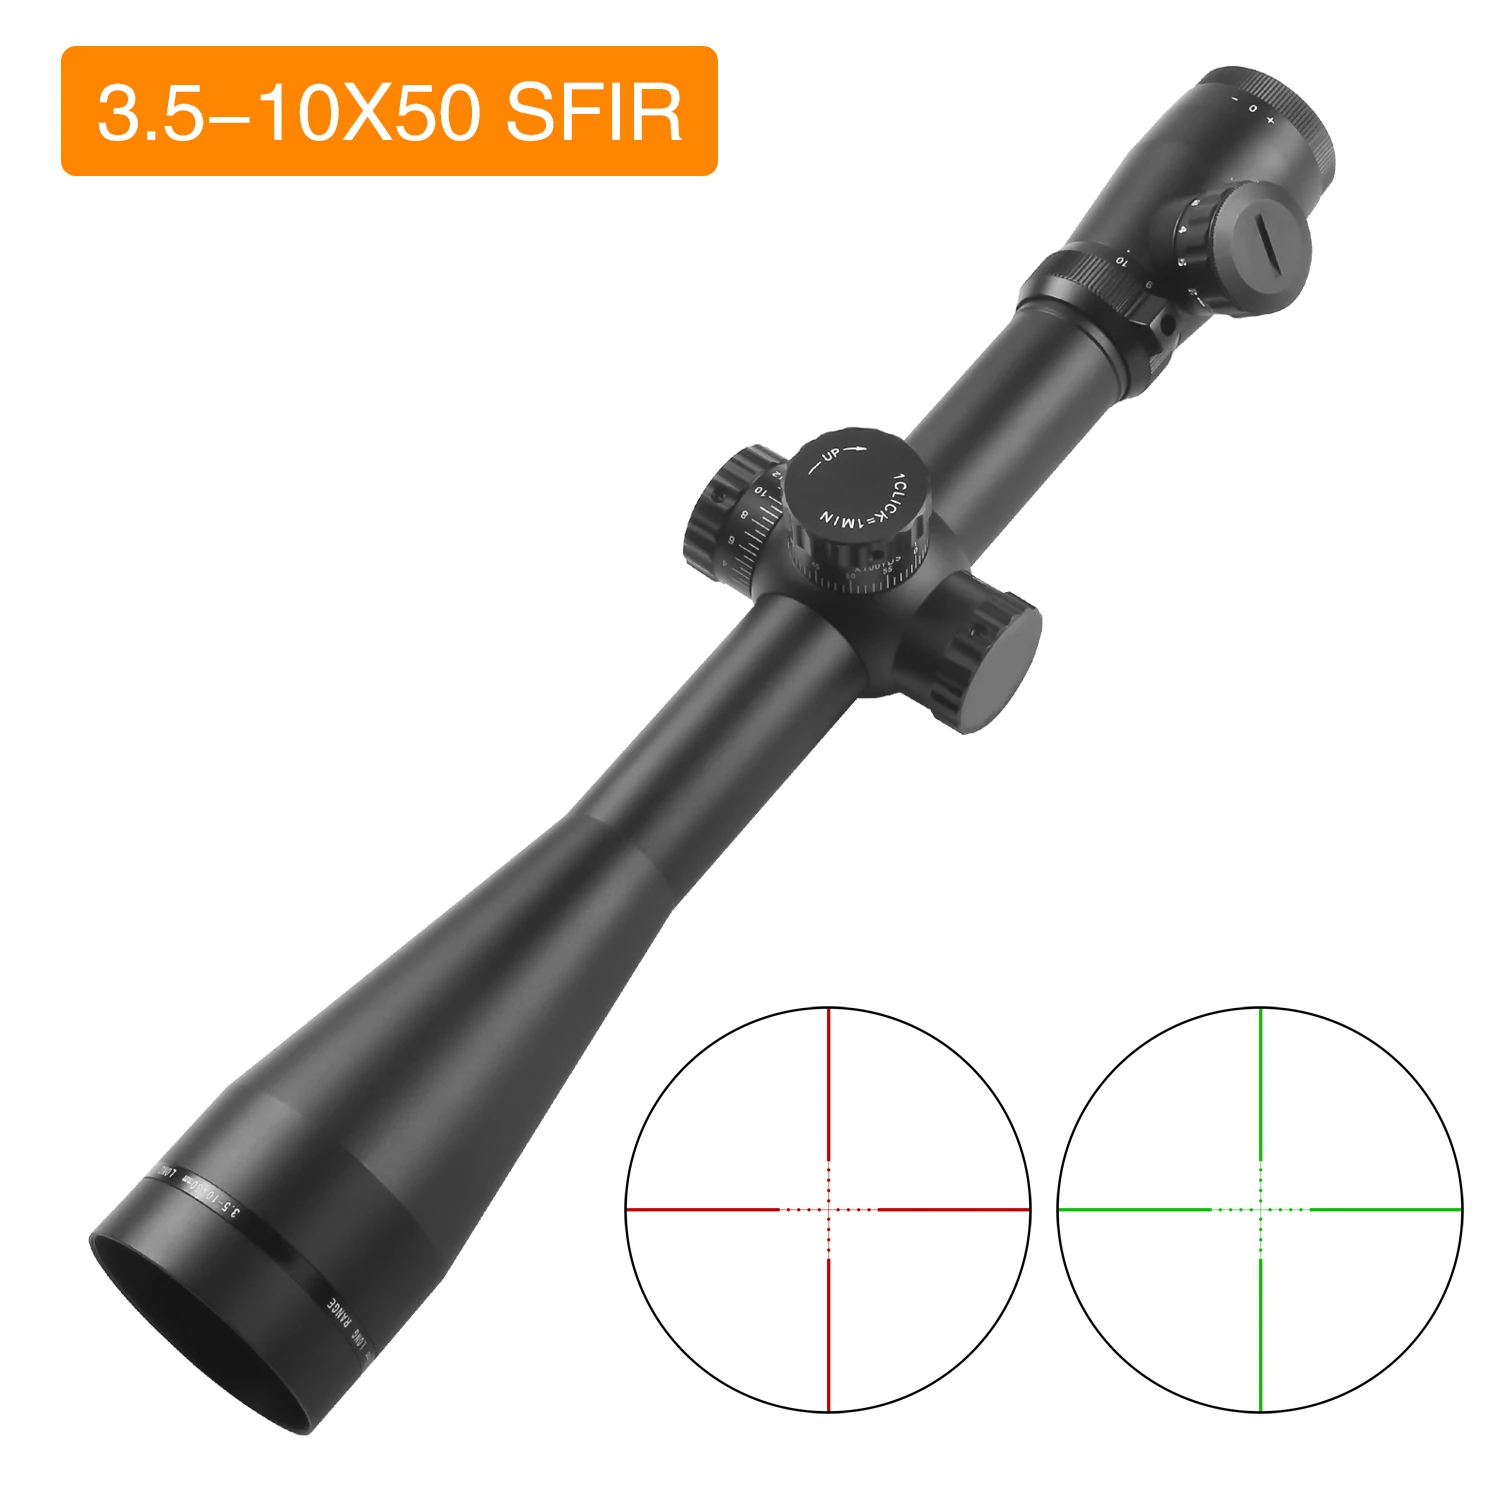 

3.5-10x50 M3 Riflescope Tactical Optical Sniper For Hunting Rifle Scopes Long Range Airsoft With Mounts Rings Airsoft Airguns